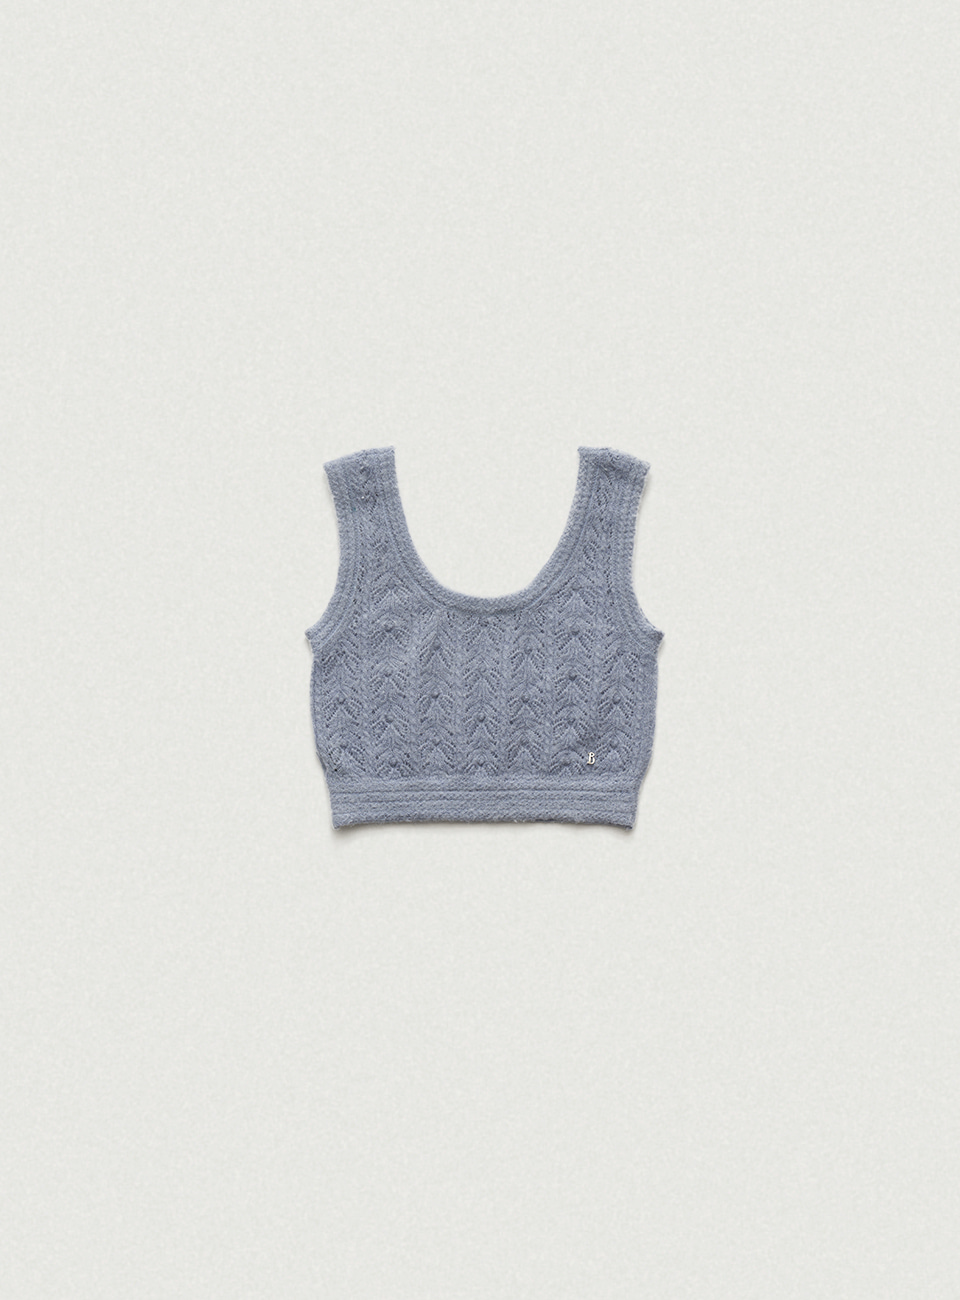 Baby Blue Coverts Knit Sleeveless Top